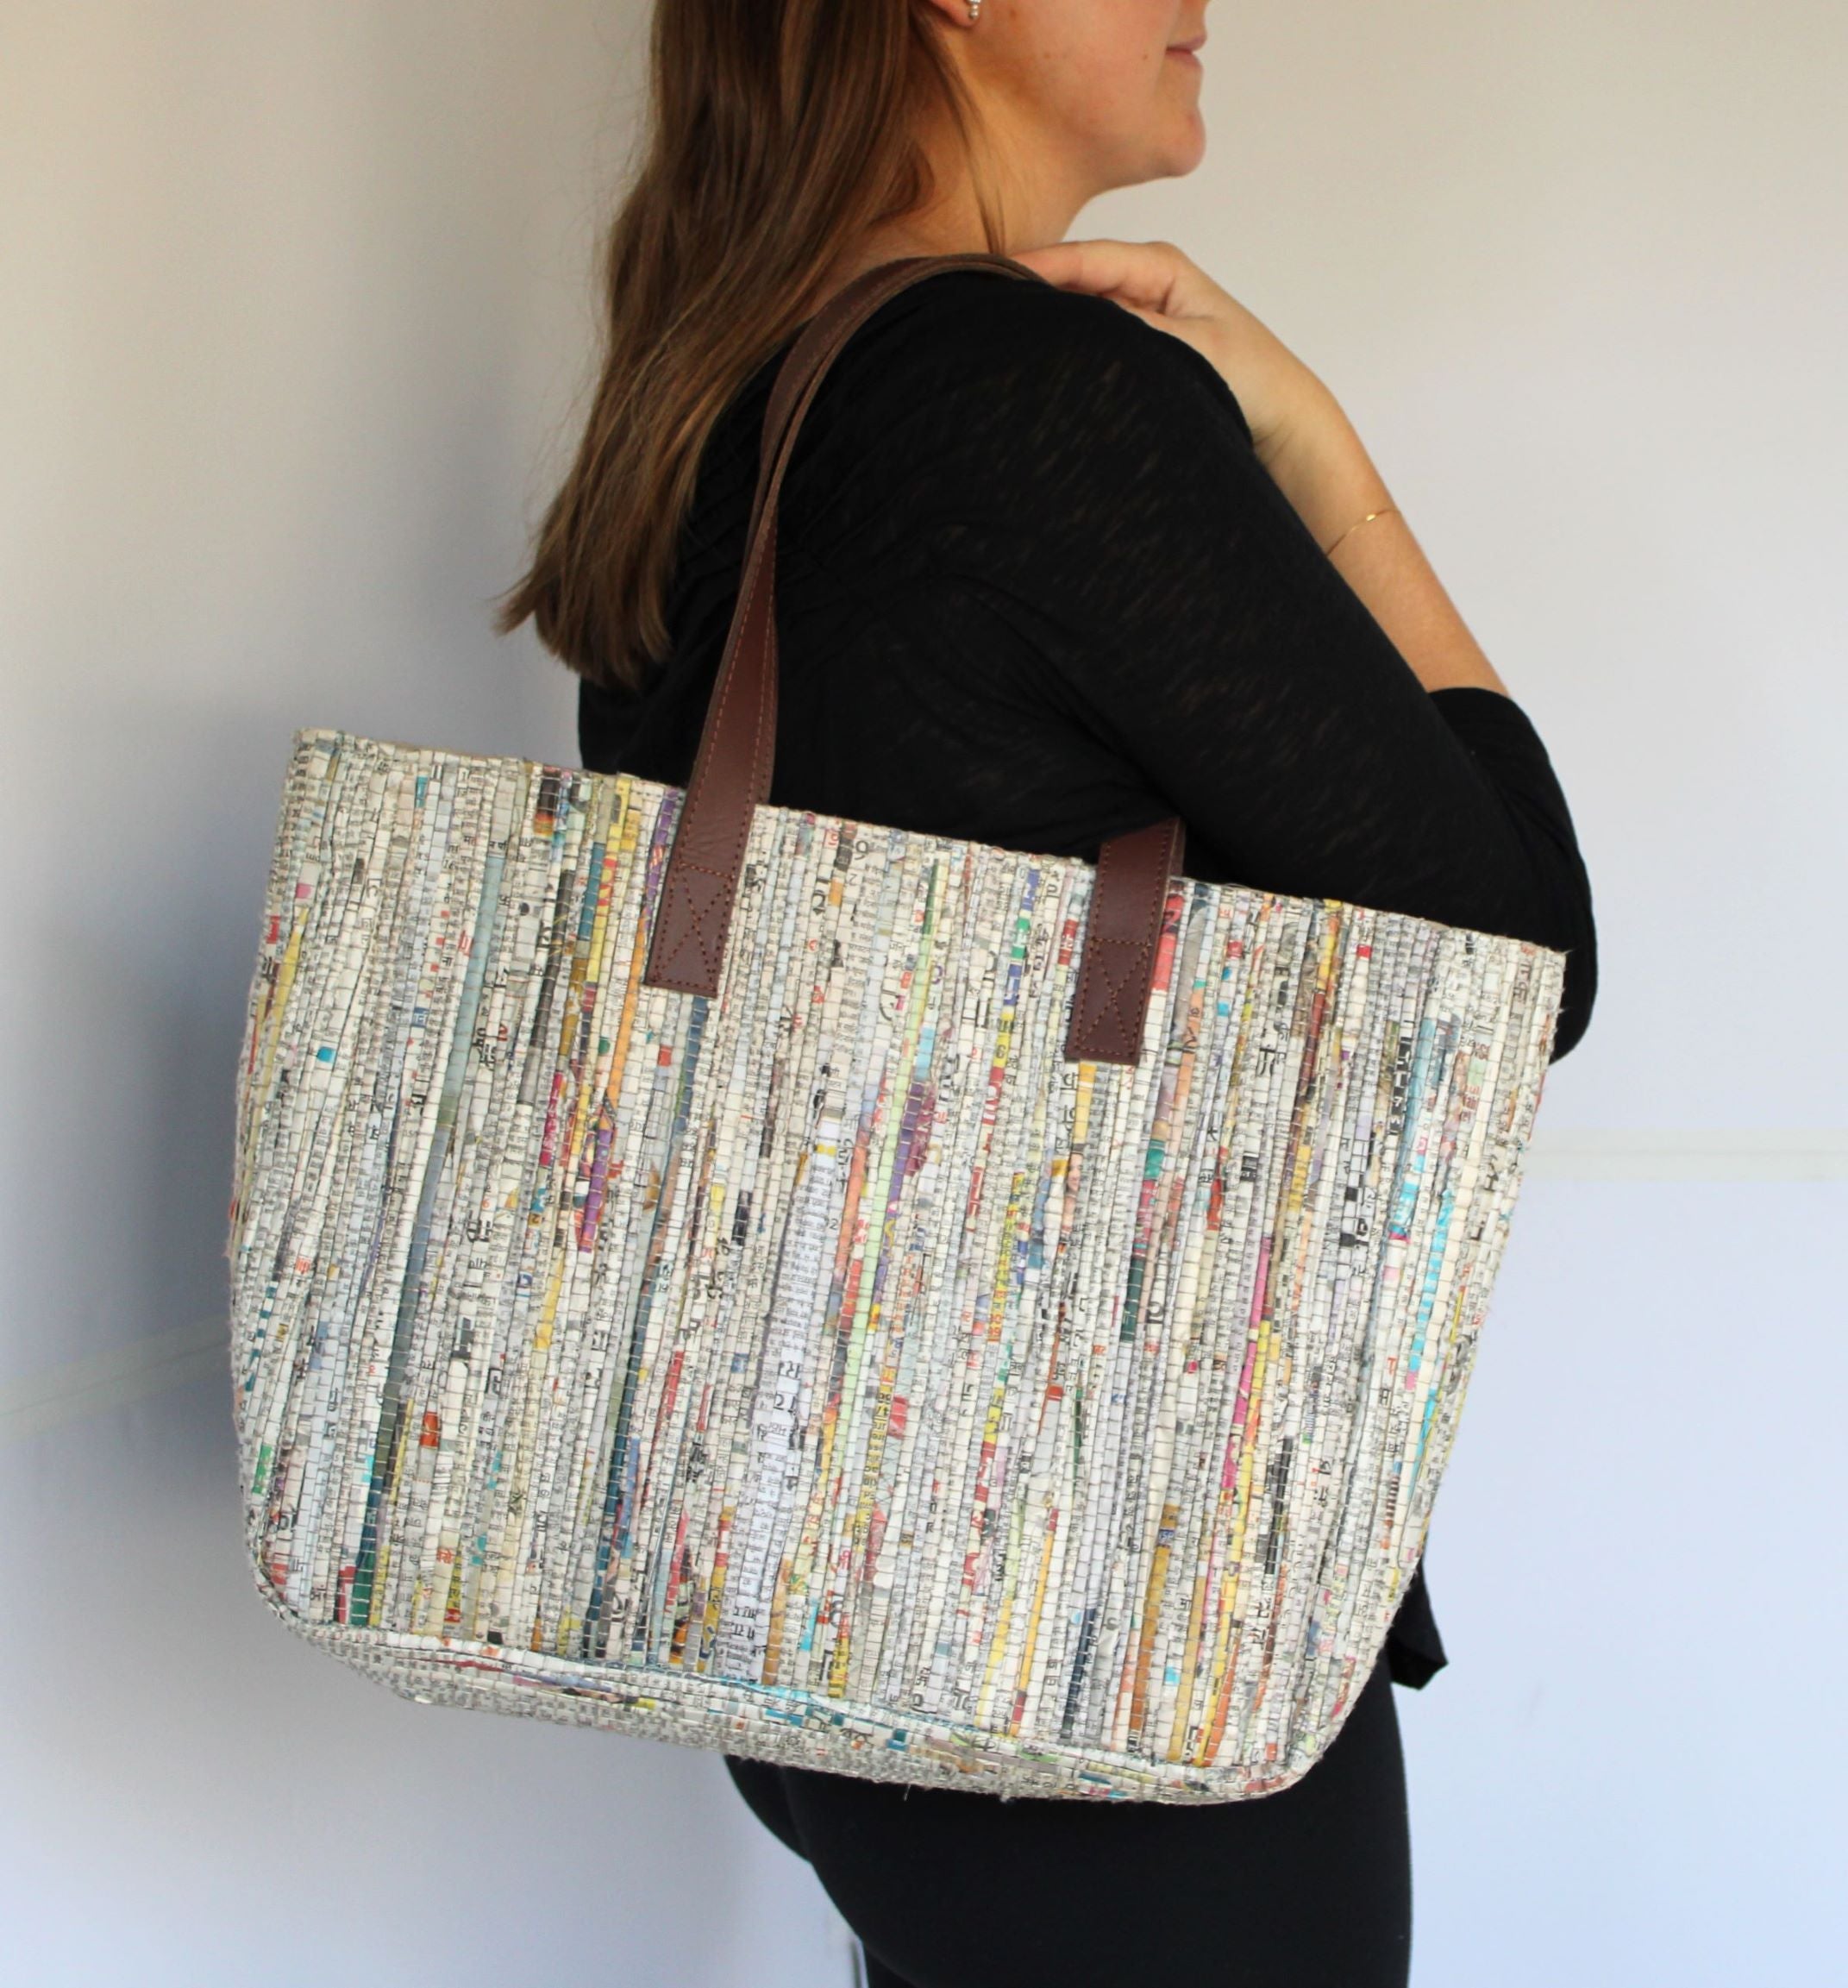 Statement Paper Tote Large